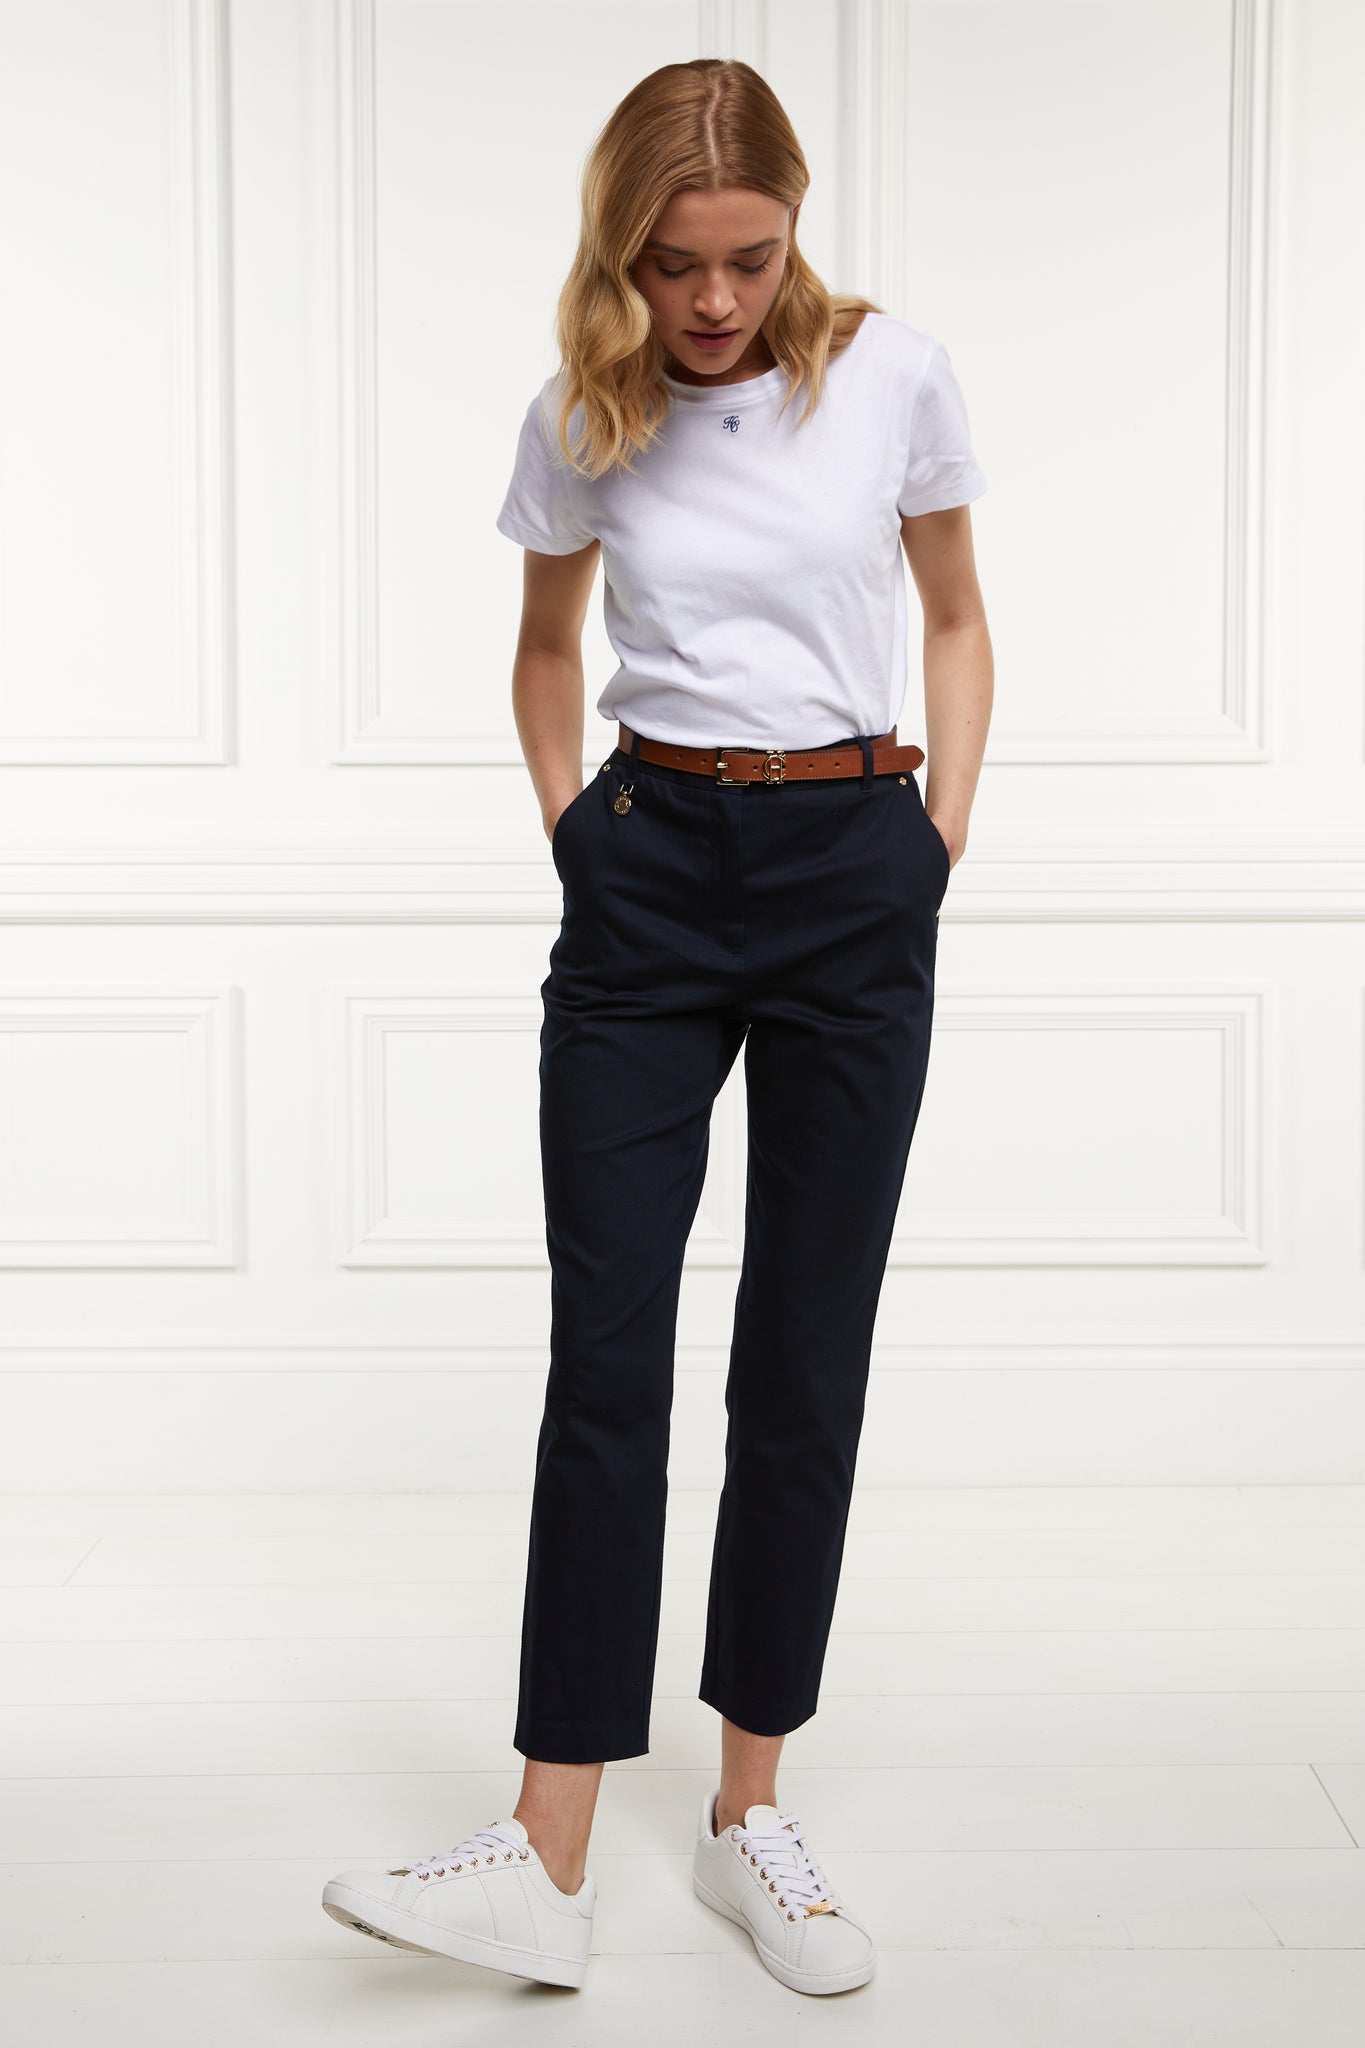 Topshop Navy Cigarette Trousers  Nordstrom Free People Shopbop  Heres  What Were Shopping From the Labor Day Sales  POPSUGAR Fashion Photo 45